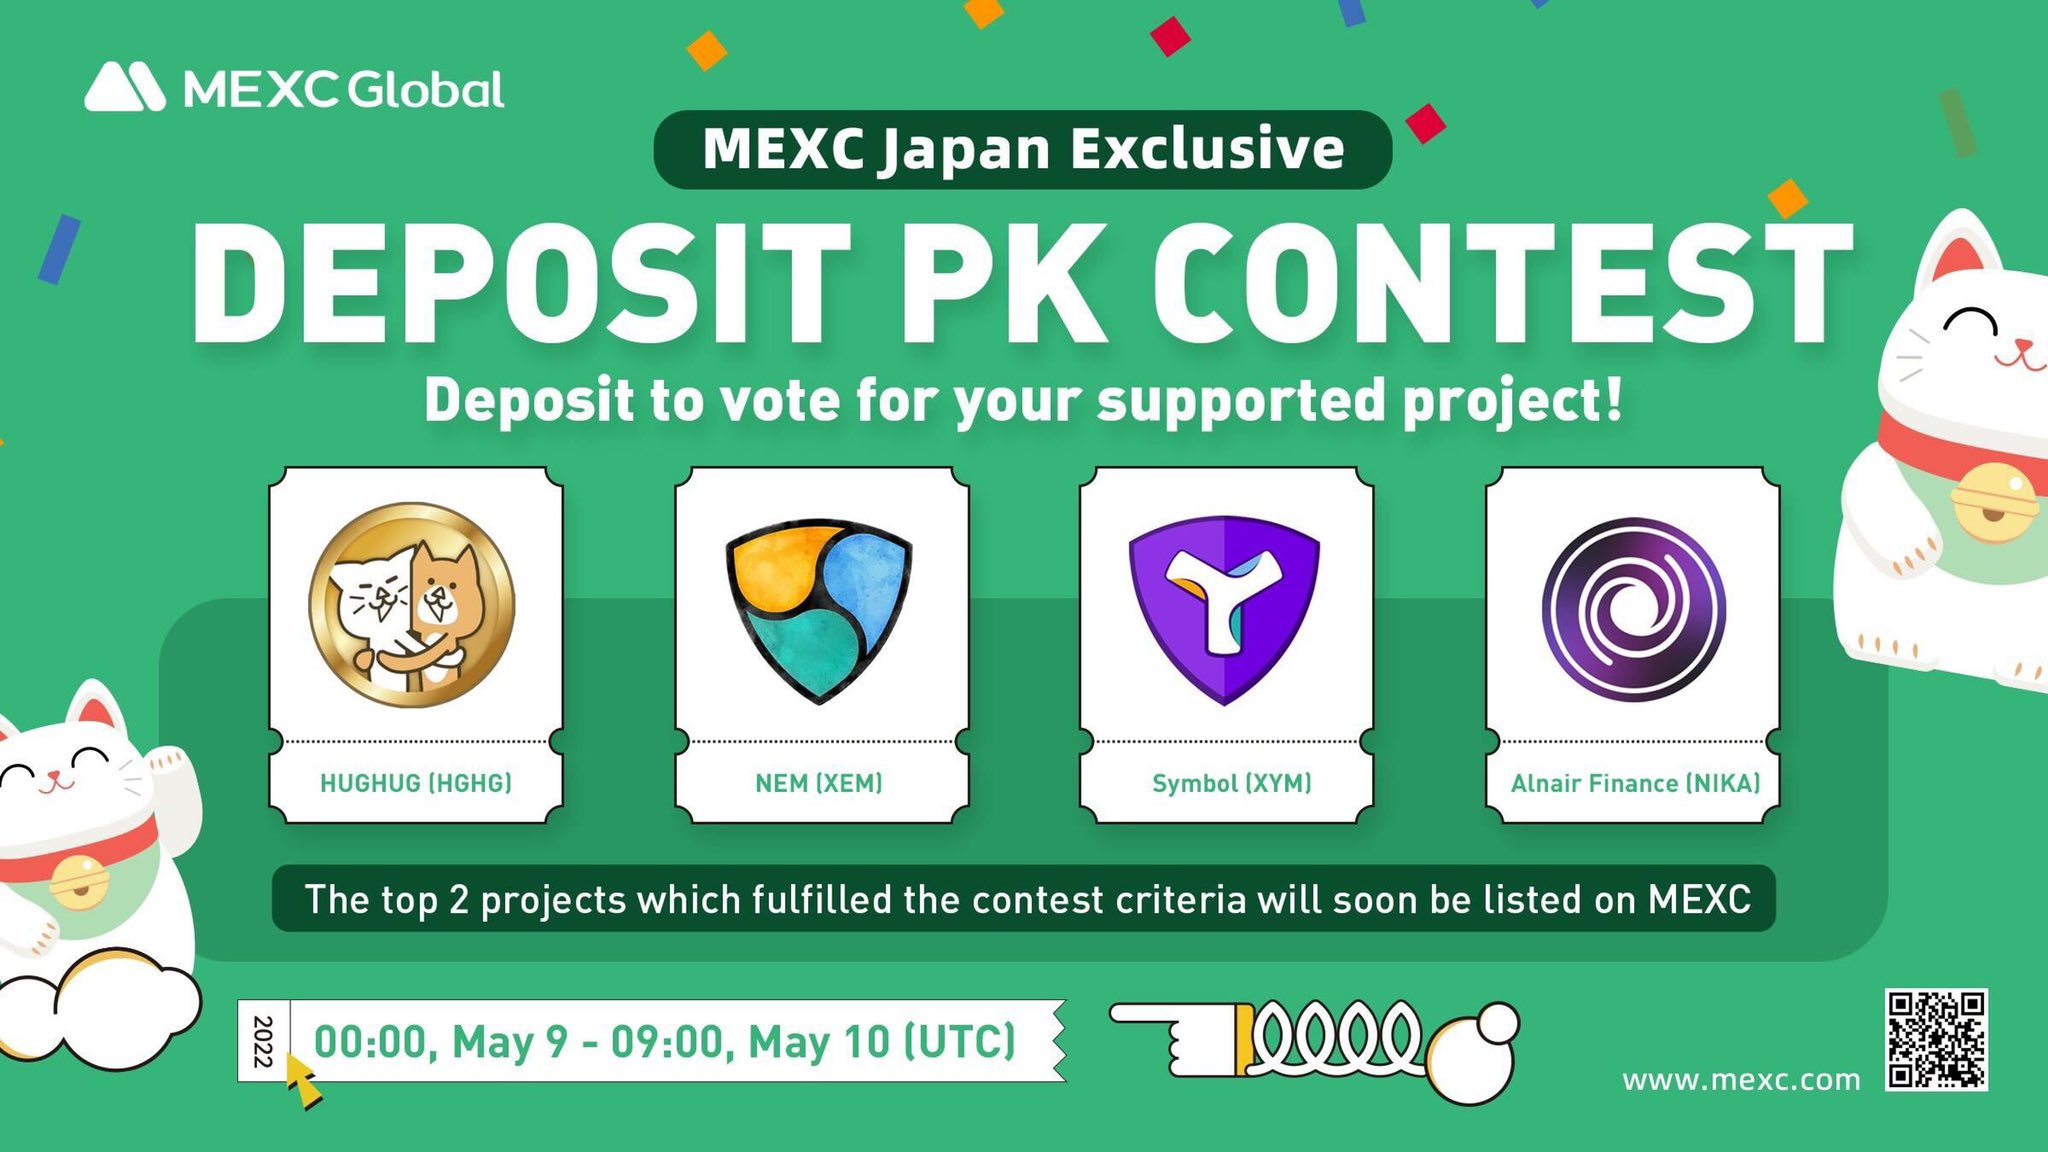 Final Result of MEXC Japan Exclusive: \Deposit PK Contest\ for HGHG, XEM,  XYM and NIKA - MEXC Global